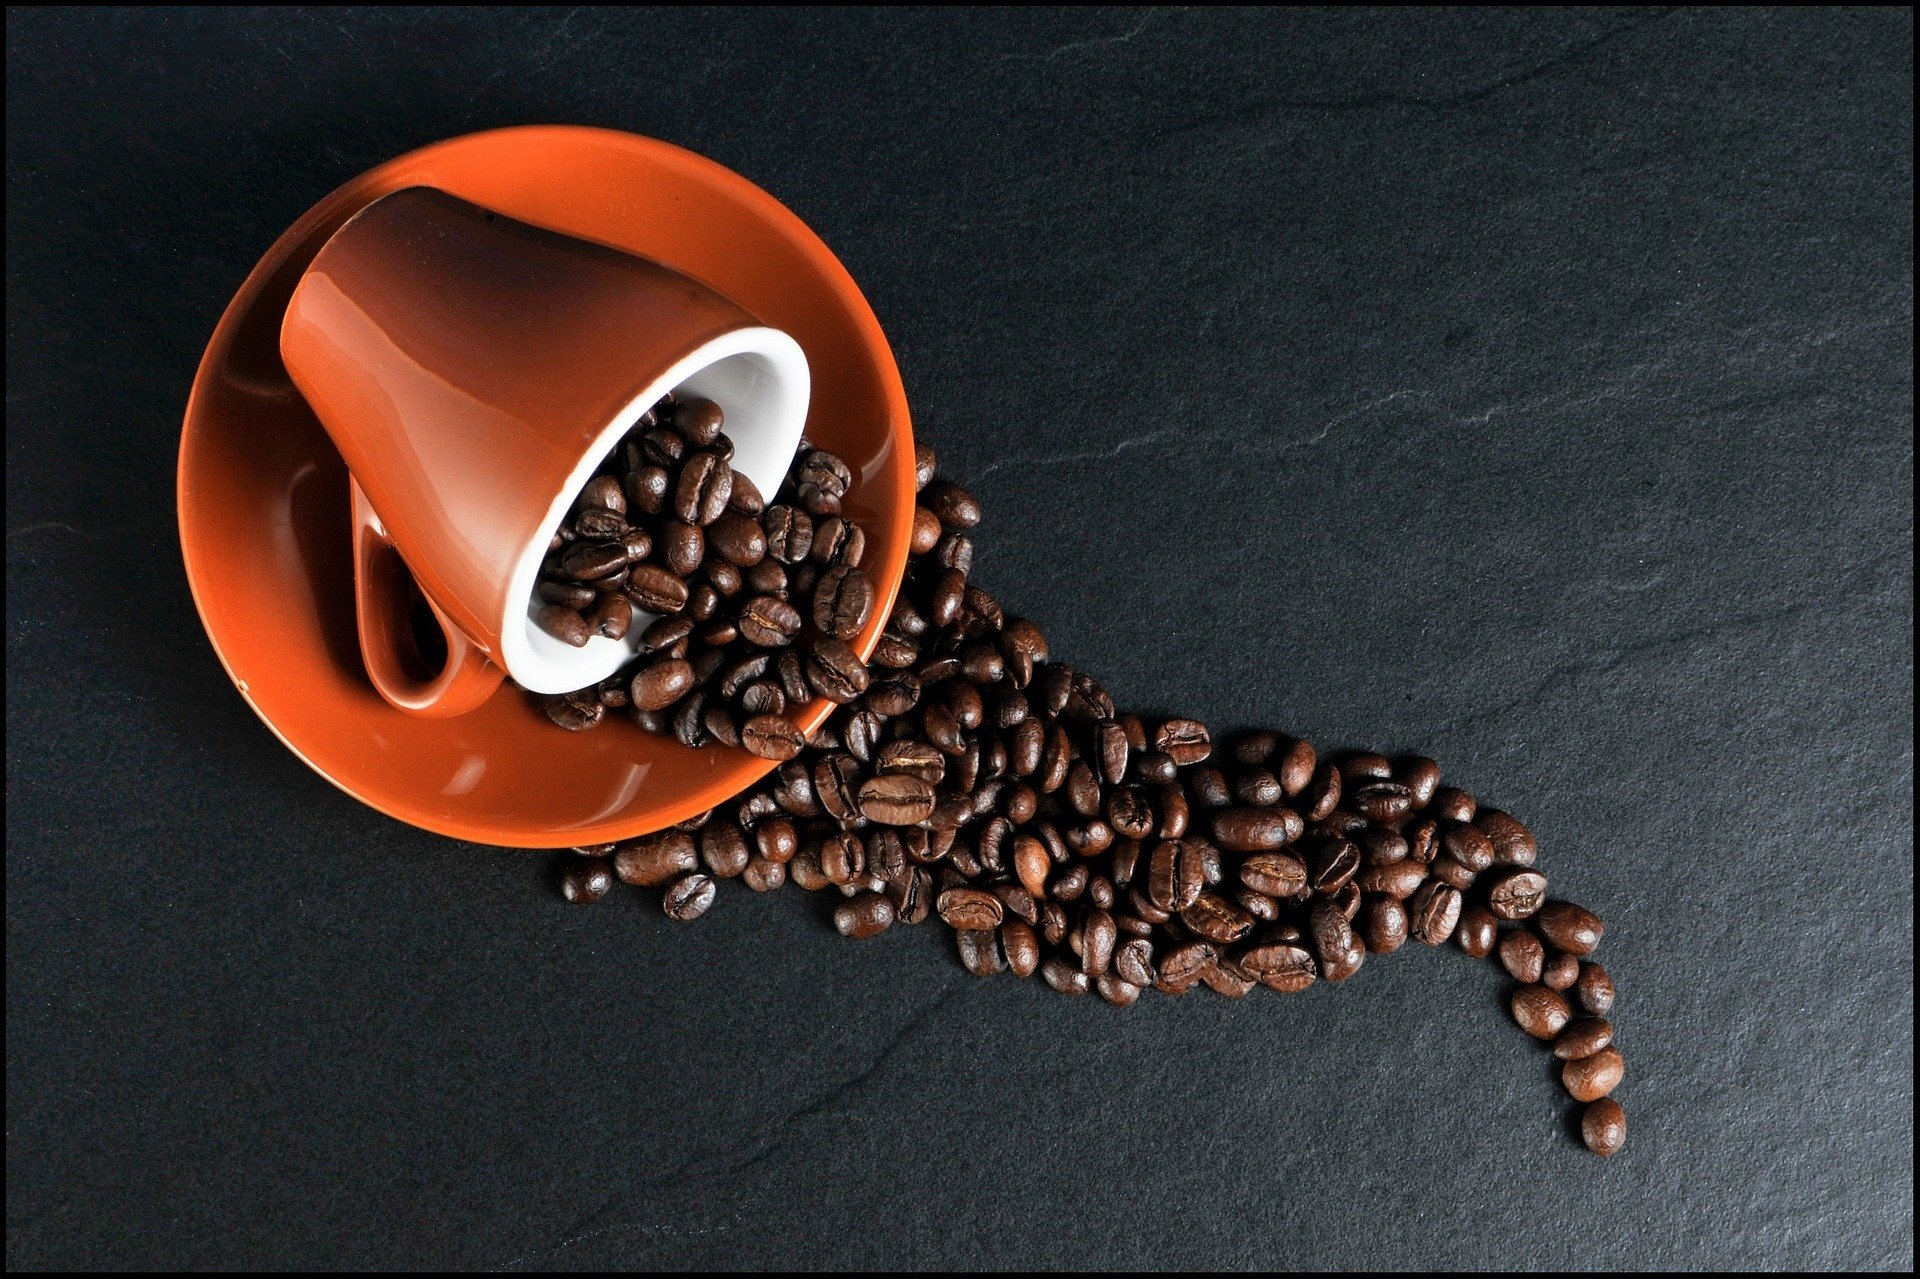 Coffee beans spilling out of a mug